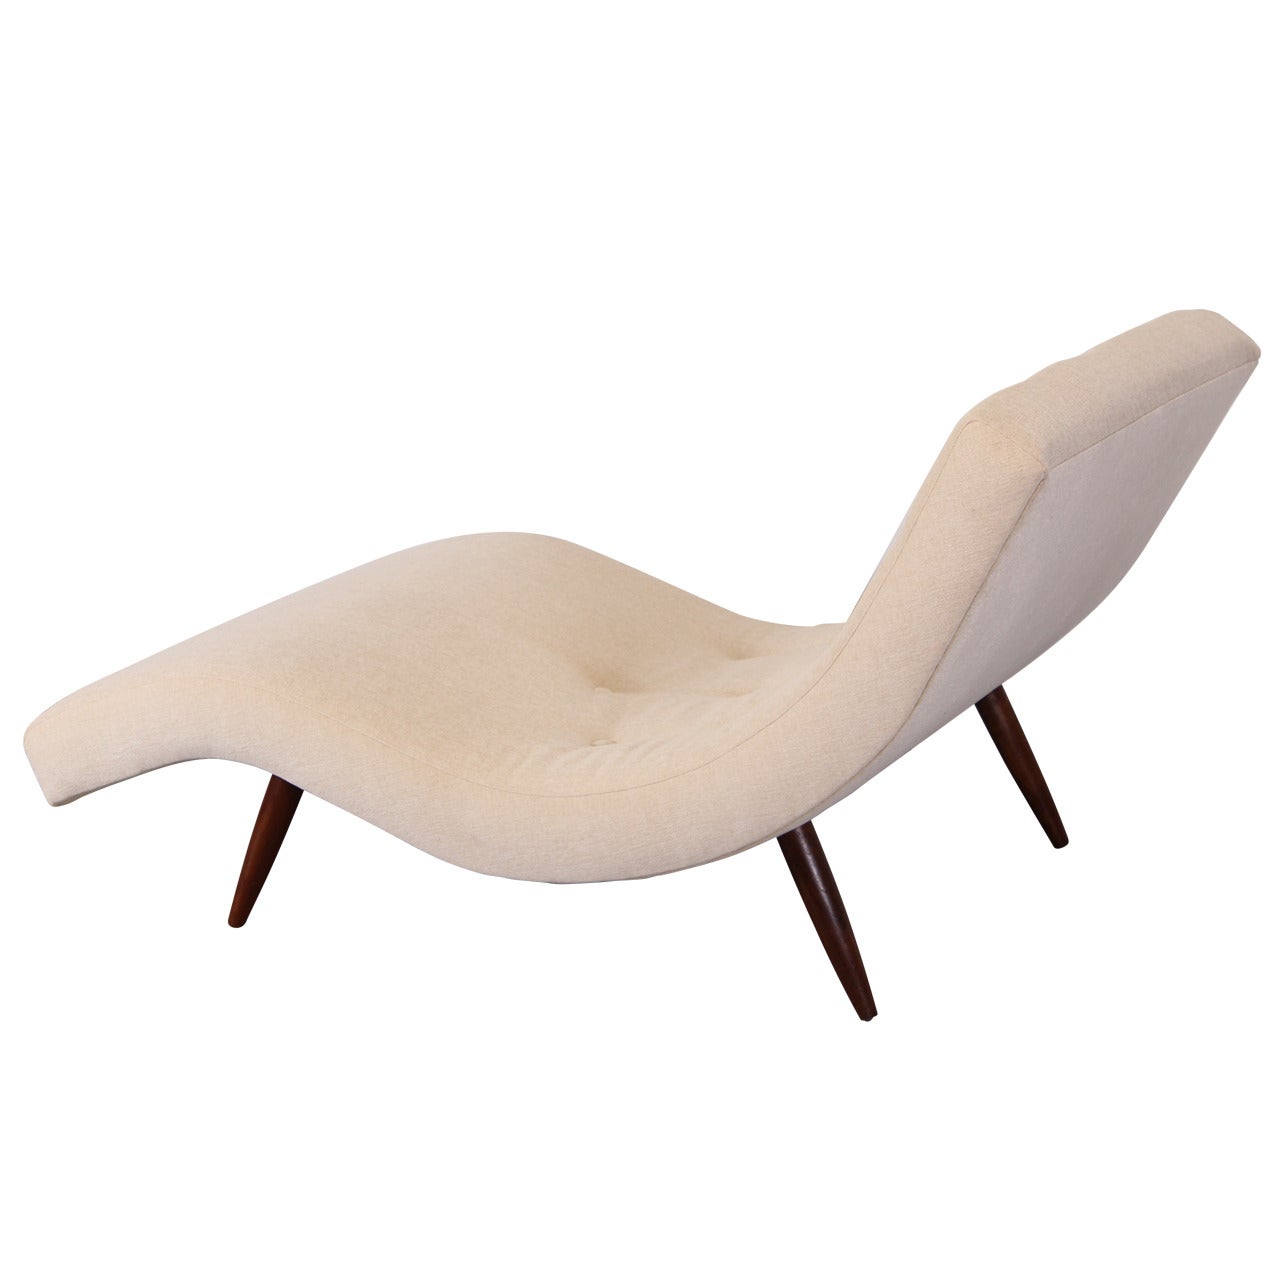 Adrian Pearsall Wave Lounge, 1960 - Pair Available